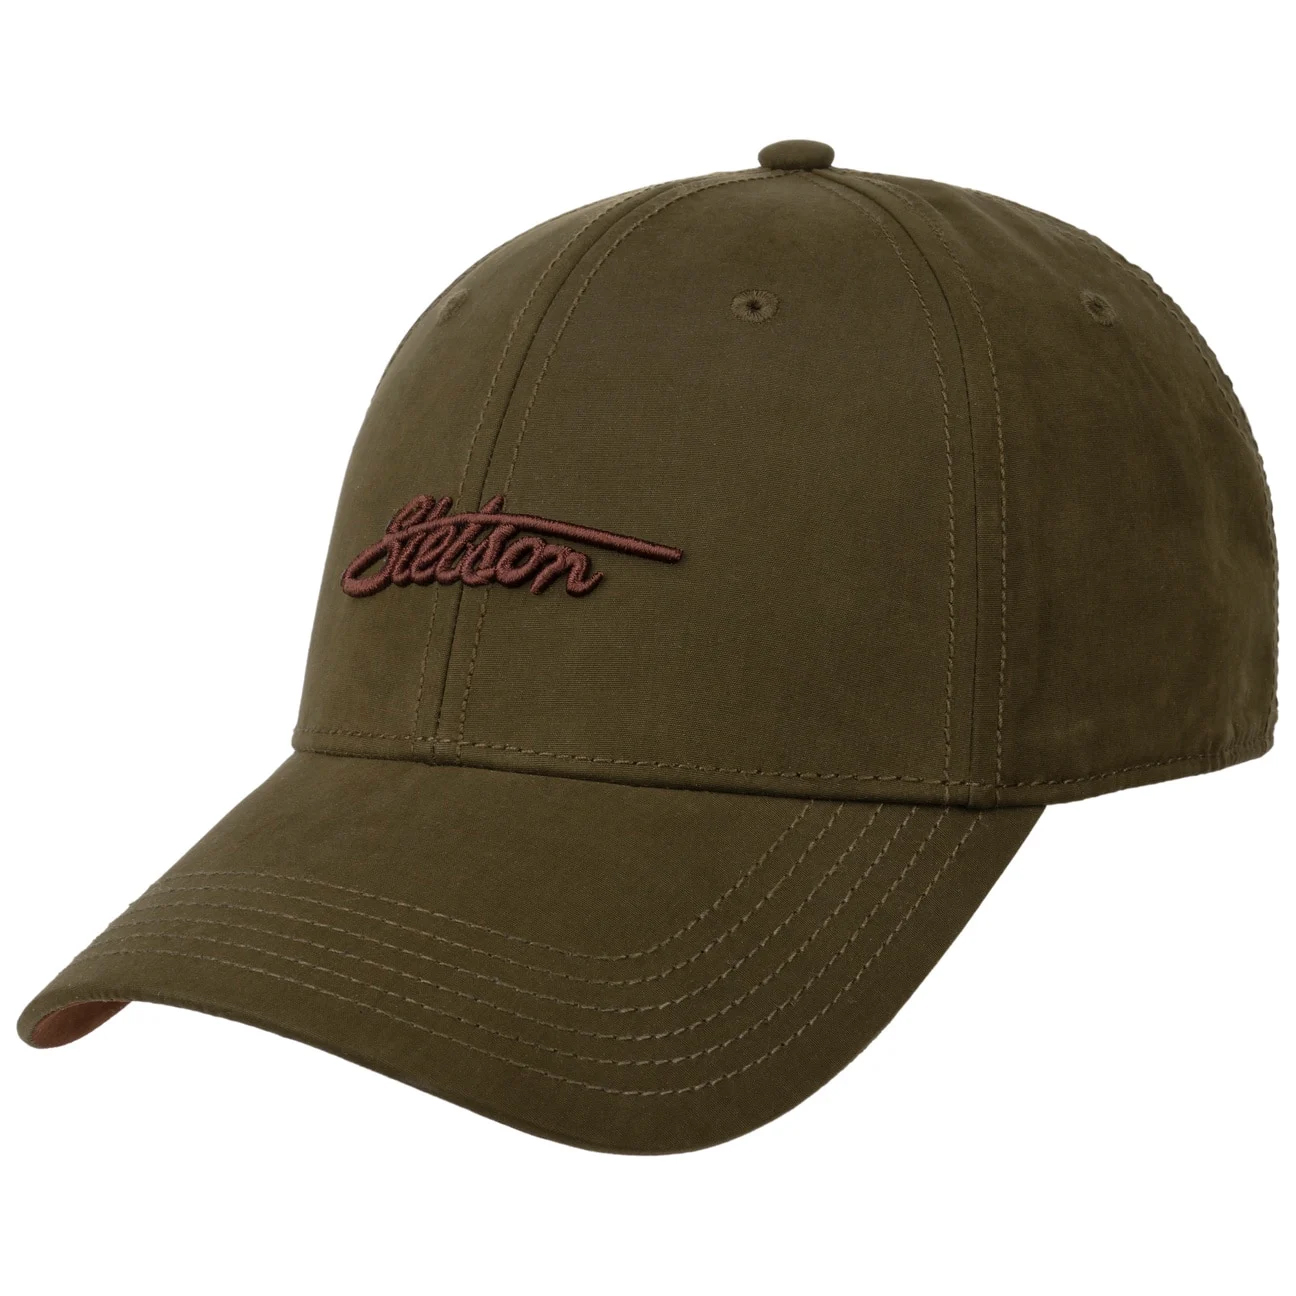 Stetson - Waxed Cotton WR Cap - Olive